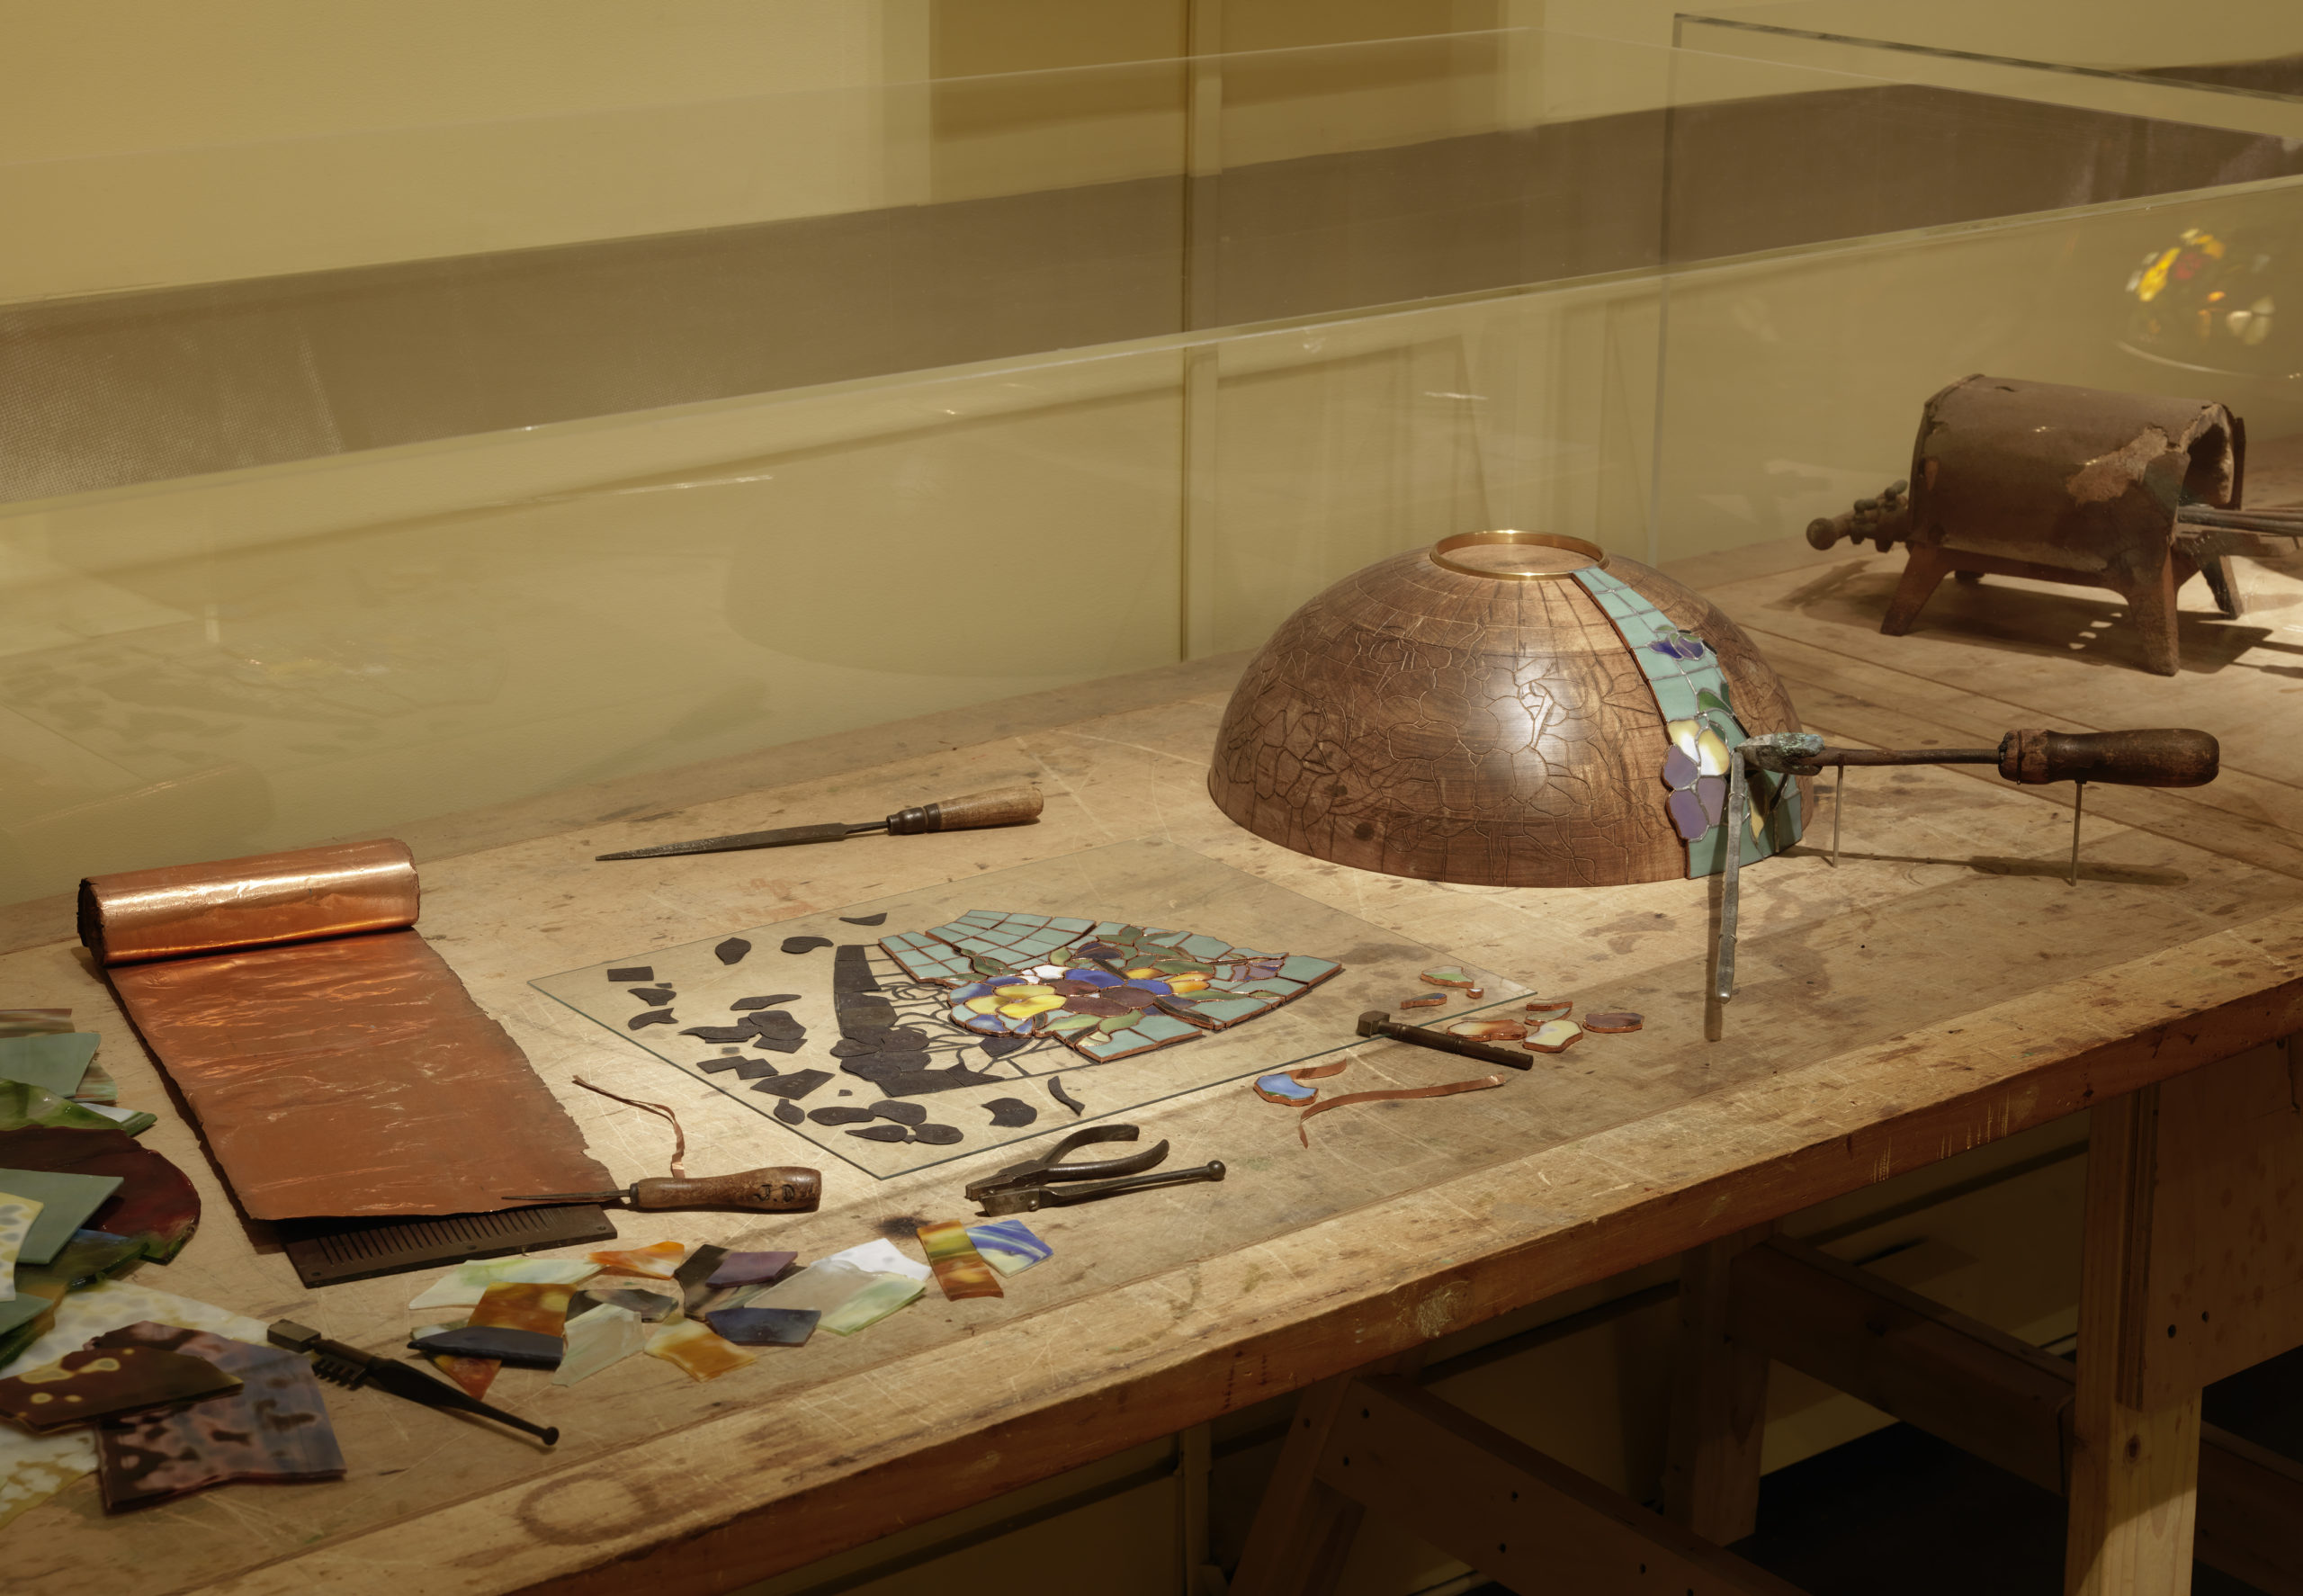 A display case showcasing tools used to fabricate Tiffany Glass lamps. On the display table lie a selection of metal and wooden tools, sheets of copper, shards of colorful glass, and a copper half-sphere mold demonstrating how Tiffany Glass lamps are assembled.